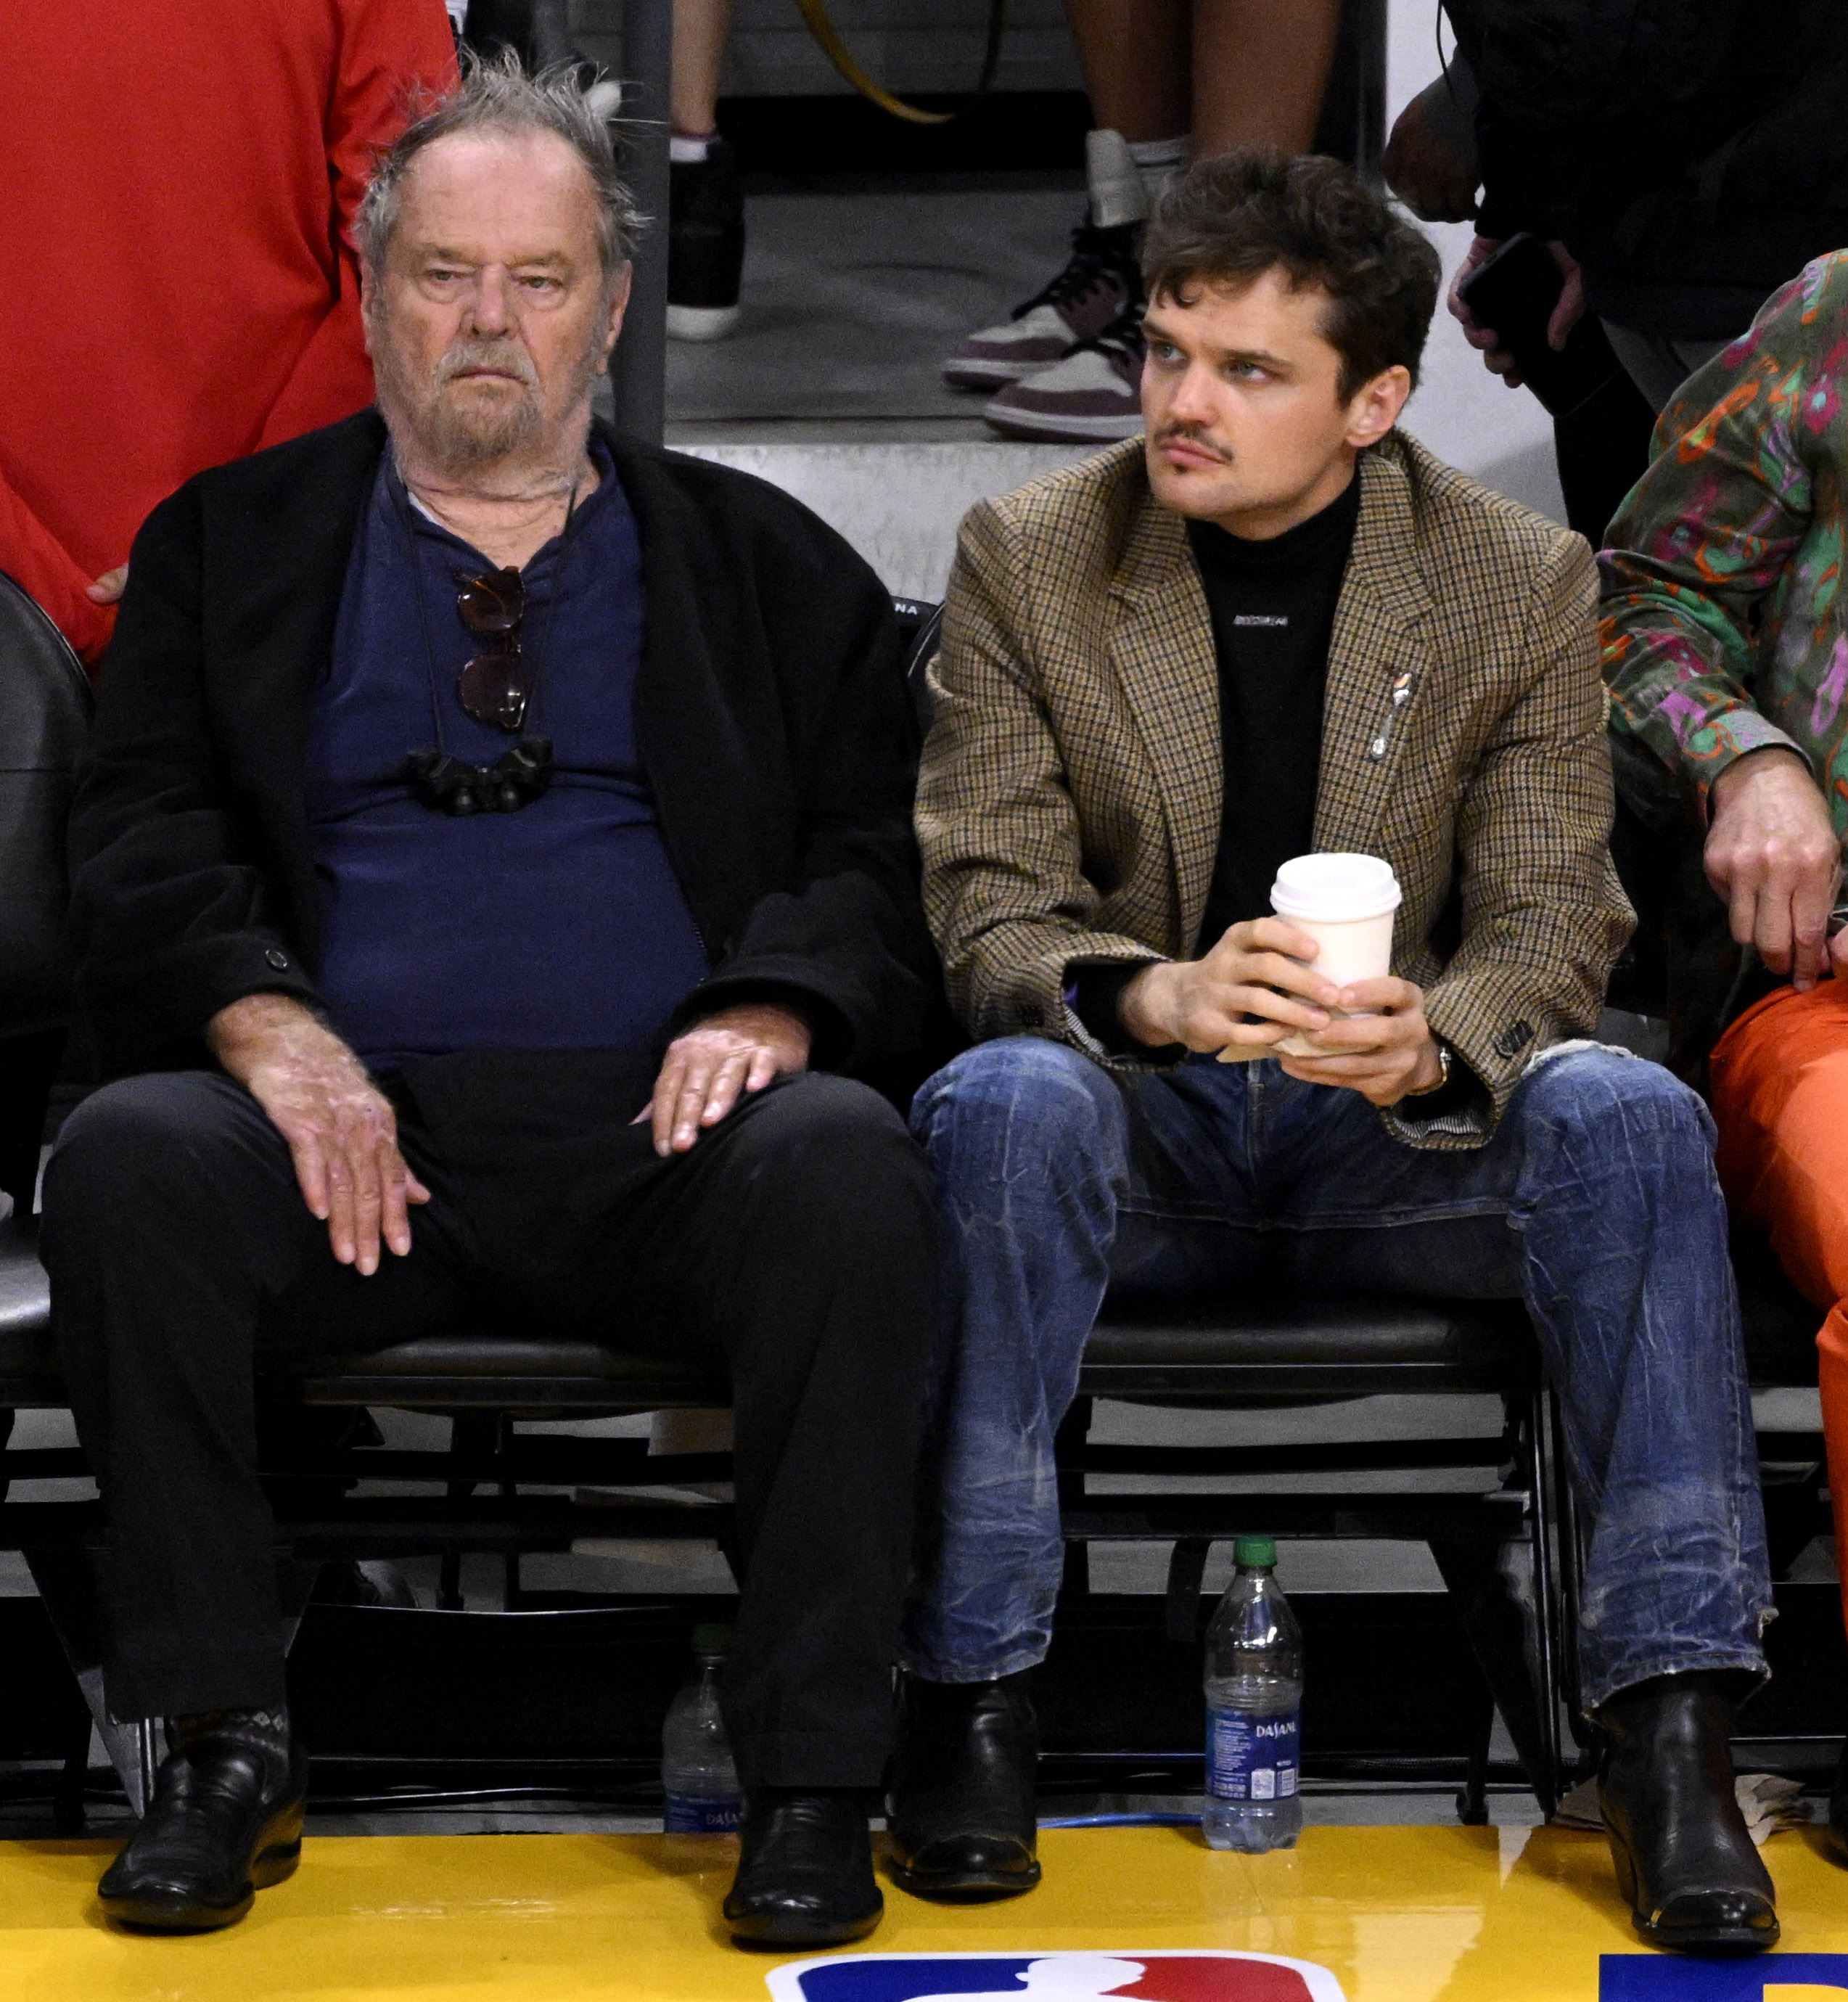 Jack Nicholson and Ray Nicholson at the finals NBA playoff basketball game between the Los Angeles Lakers and the Denver Nuggets in Los Angeles on May 20, 2023 | Source: Getty Images